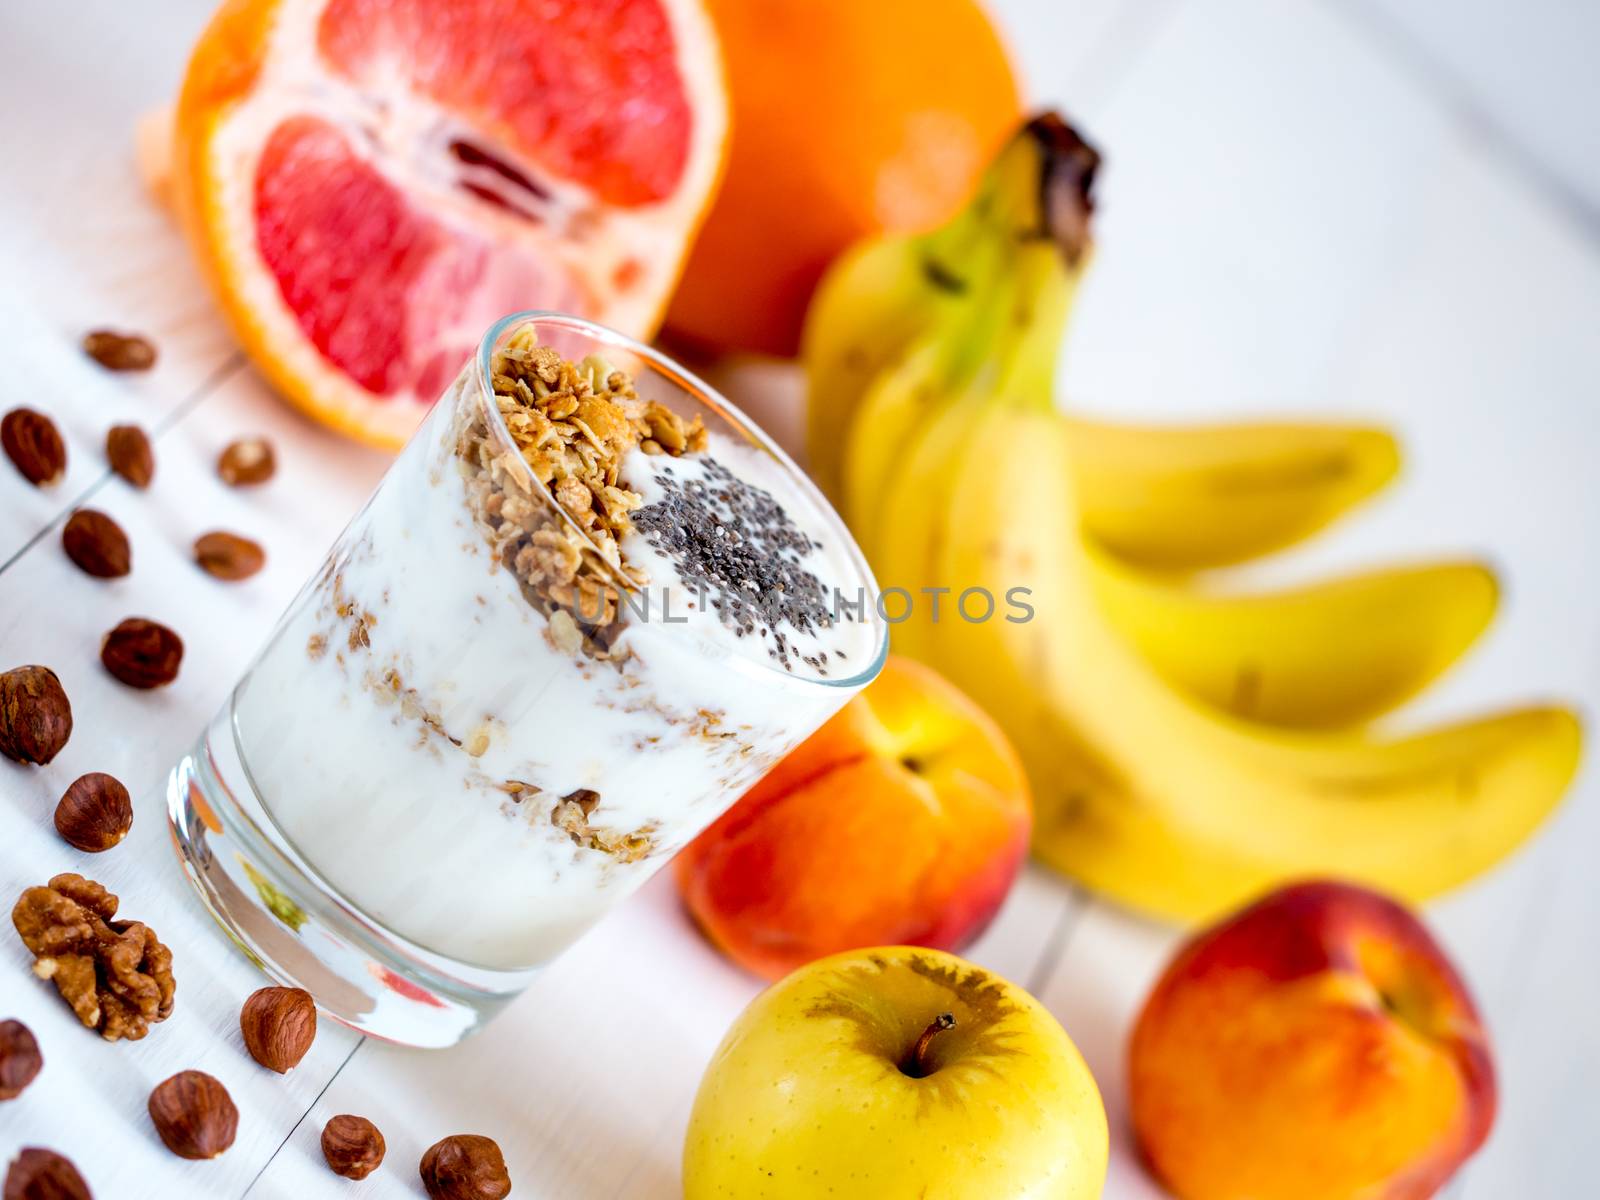 Healthy breakfast: yogurt with muesli and chia seeds, fruits and nuts on white wooden background. Dieting, healthy lifestyle concept meal